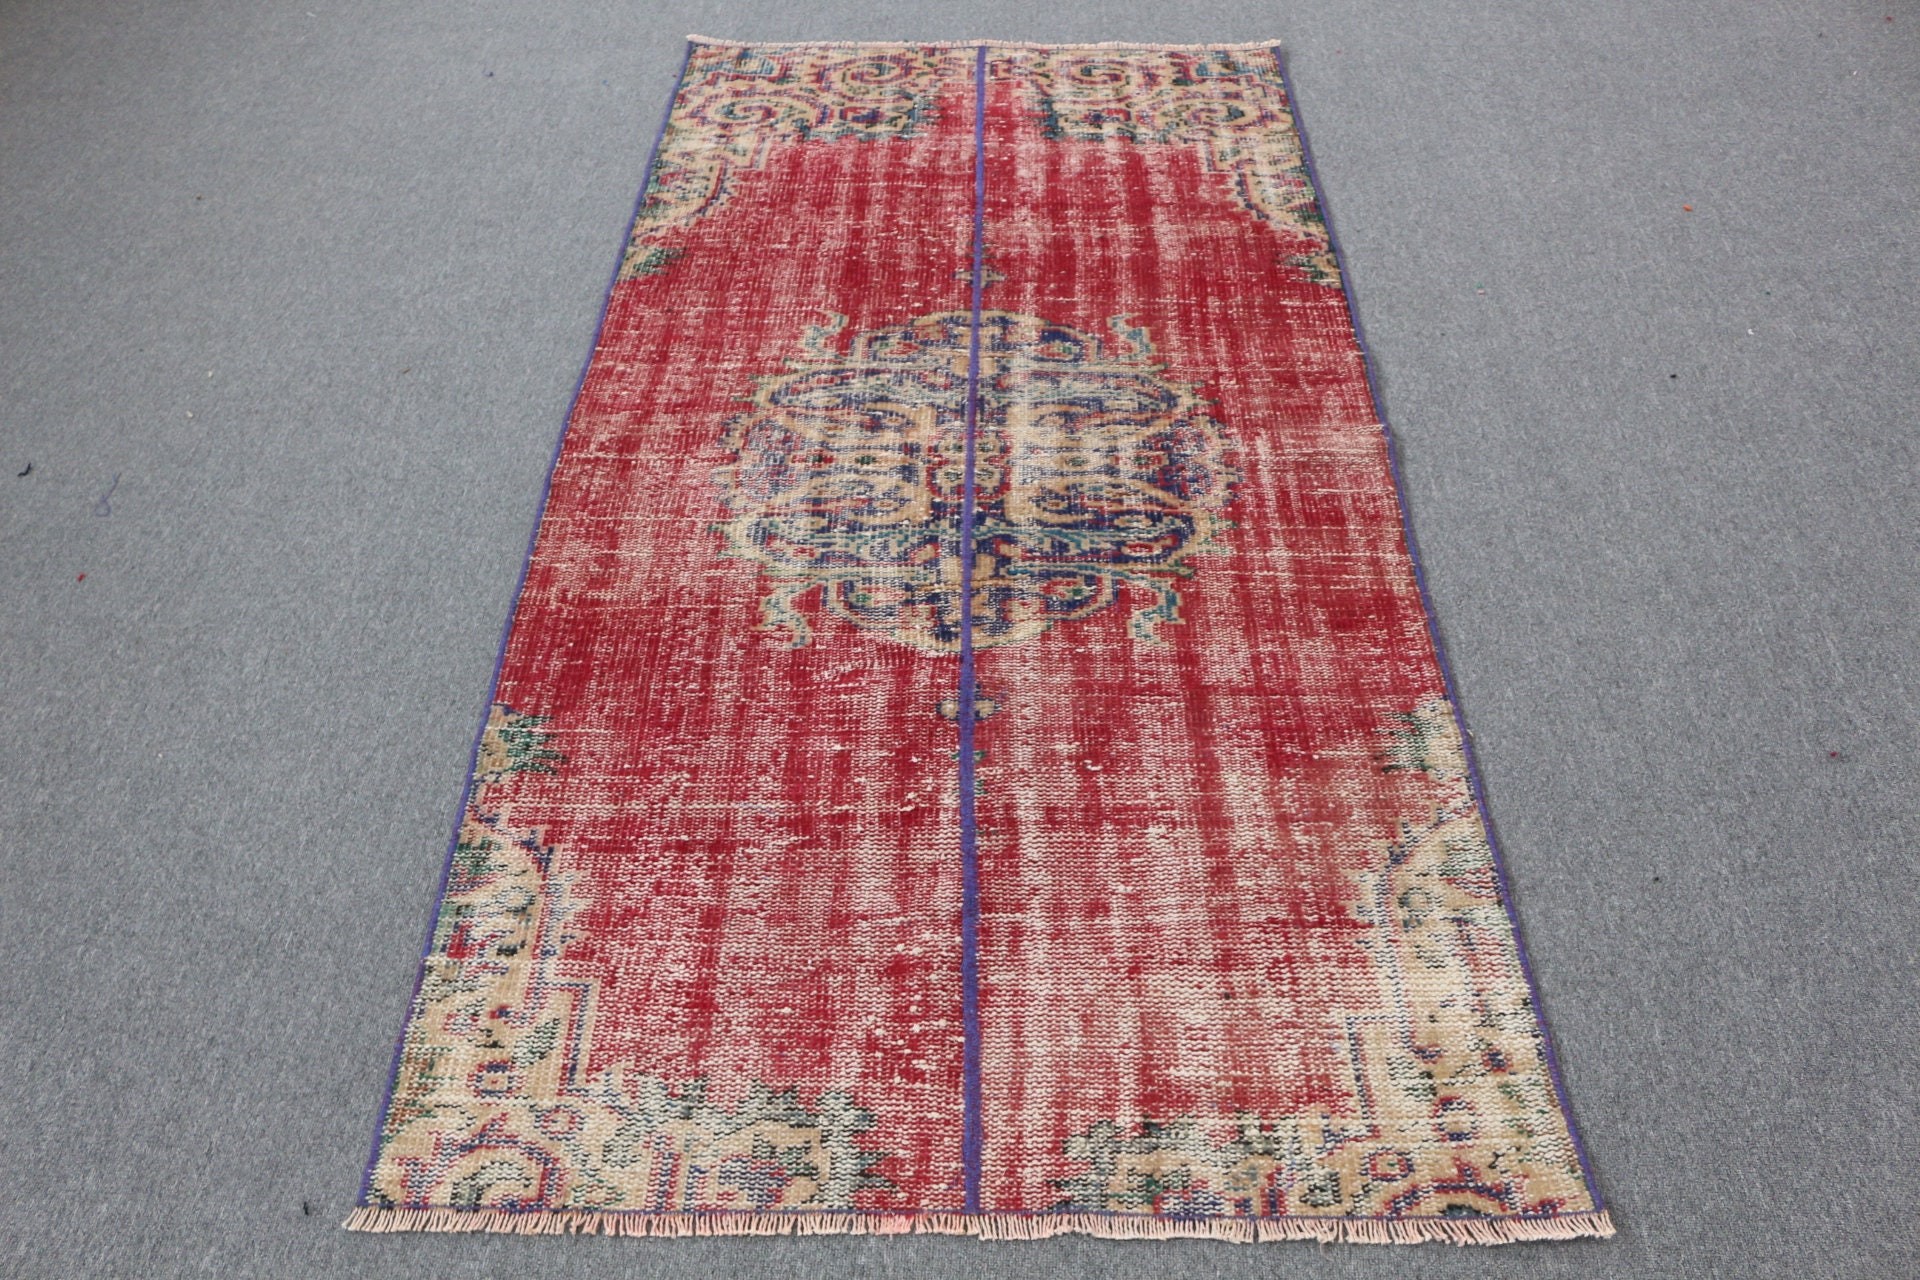 Vintage Rug, Moroccan Rug, Turkish Rugs, 3.4x6.7 ft Accent Rug, Entry Rug, Red Cool Rug, Kitchen Rugs, Old Rug, Cool Rugs, Rugs for Bedroom